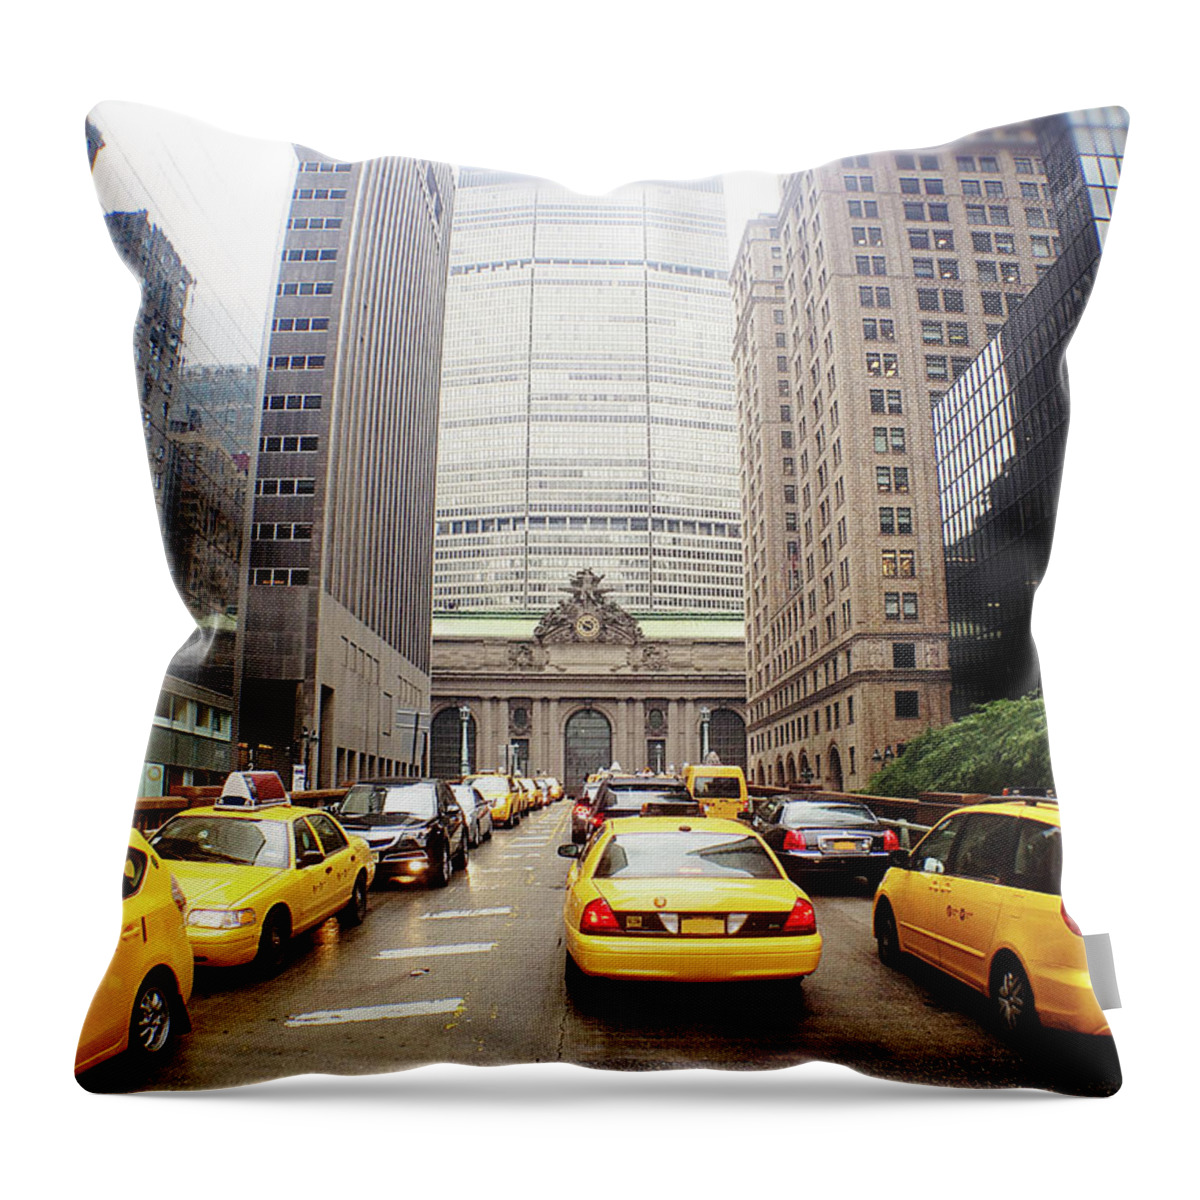 Hubcap Throw Pillow featuring the photograph Taxis Outside Of Grand Central Station by William Andrew